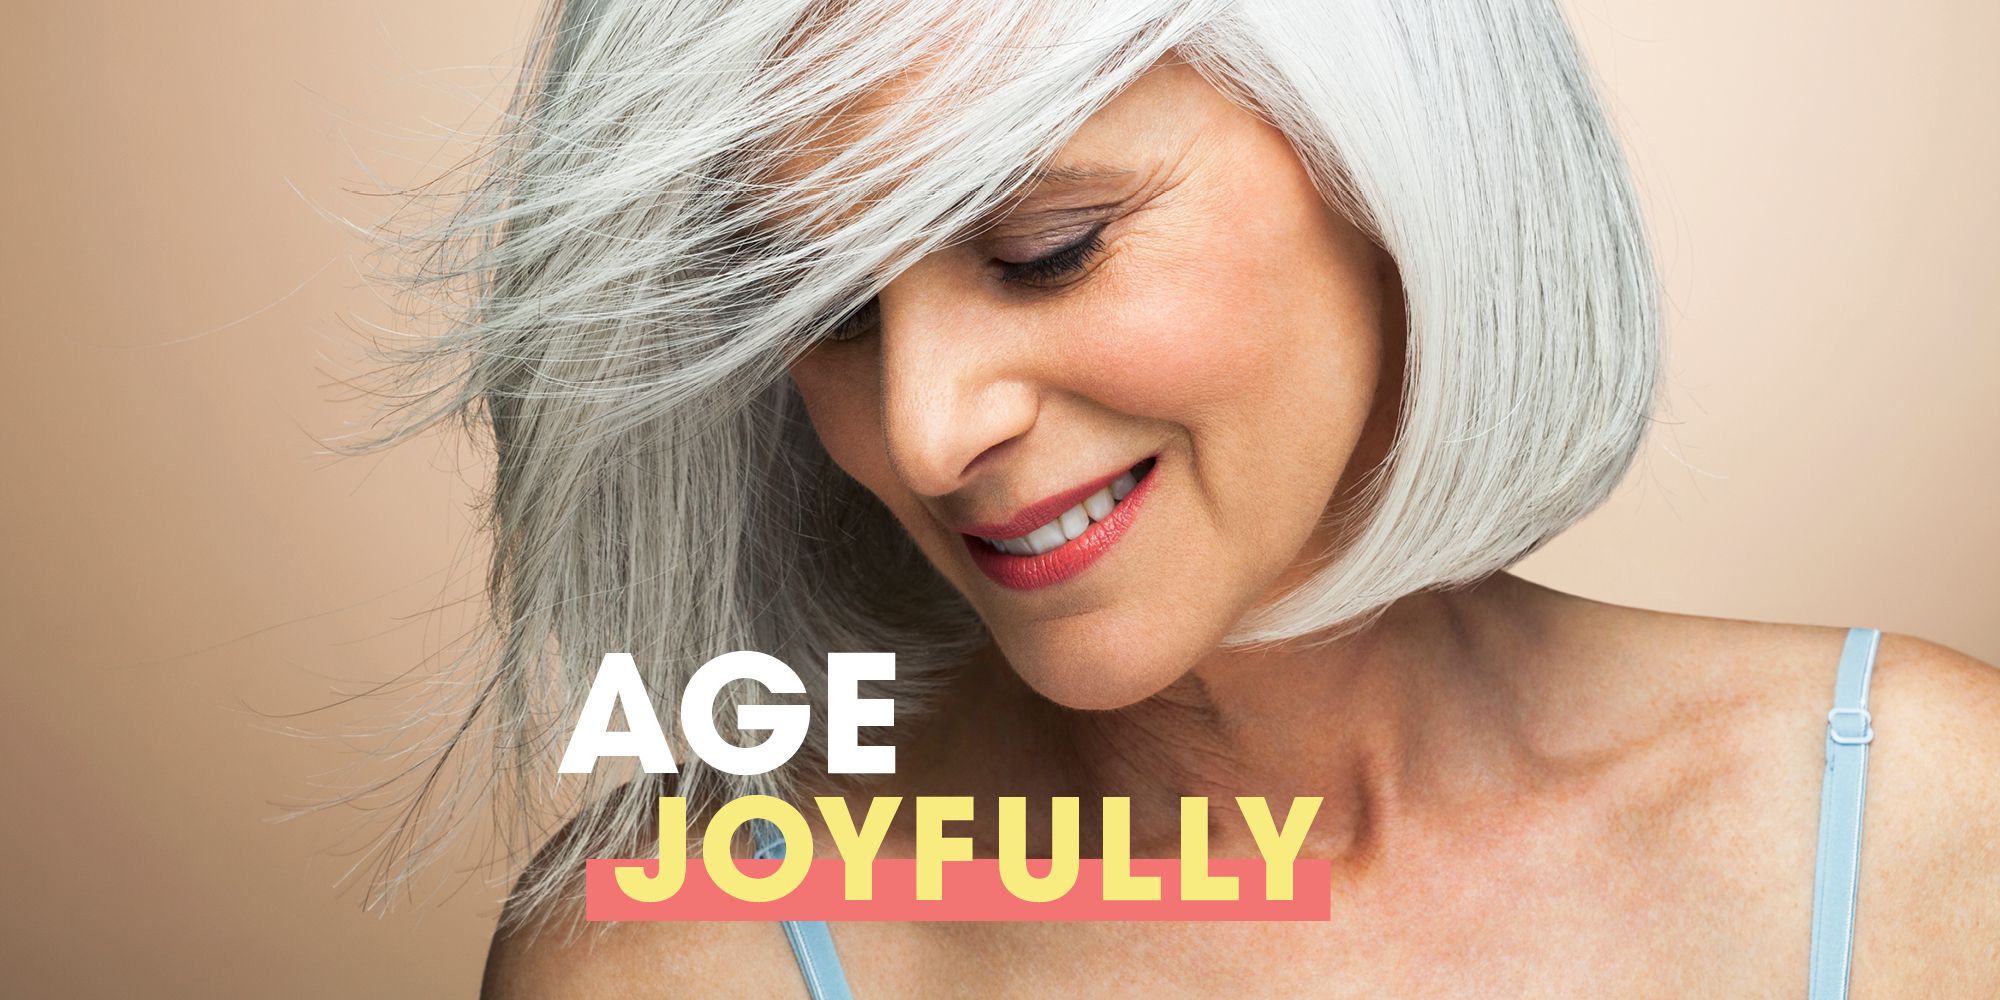 Embracing My Gray Hair Has Allowed Me to Age Beautifully